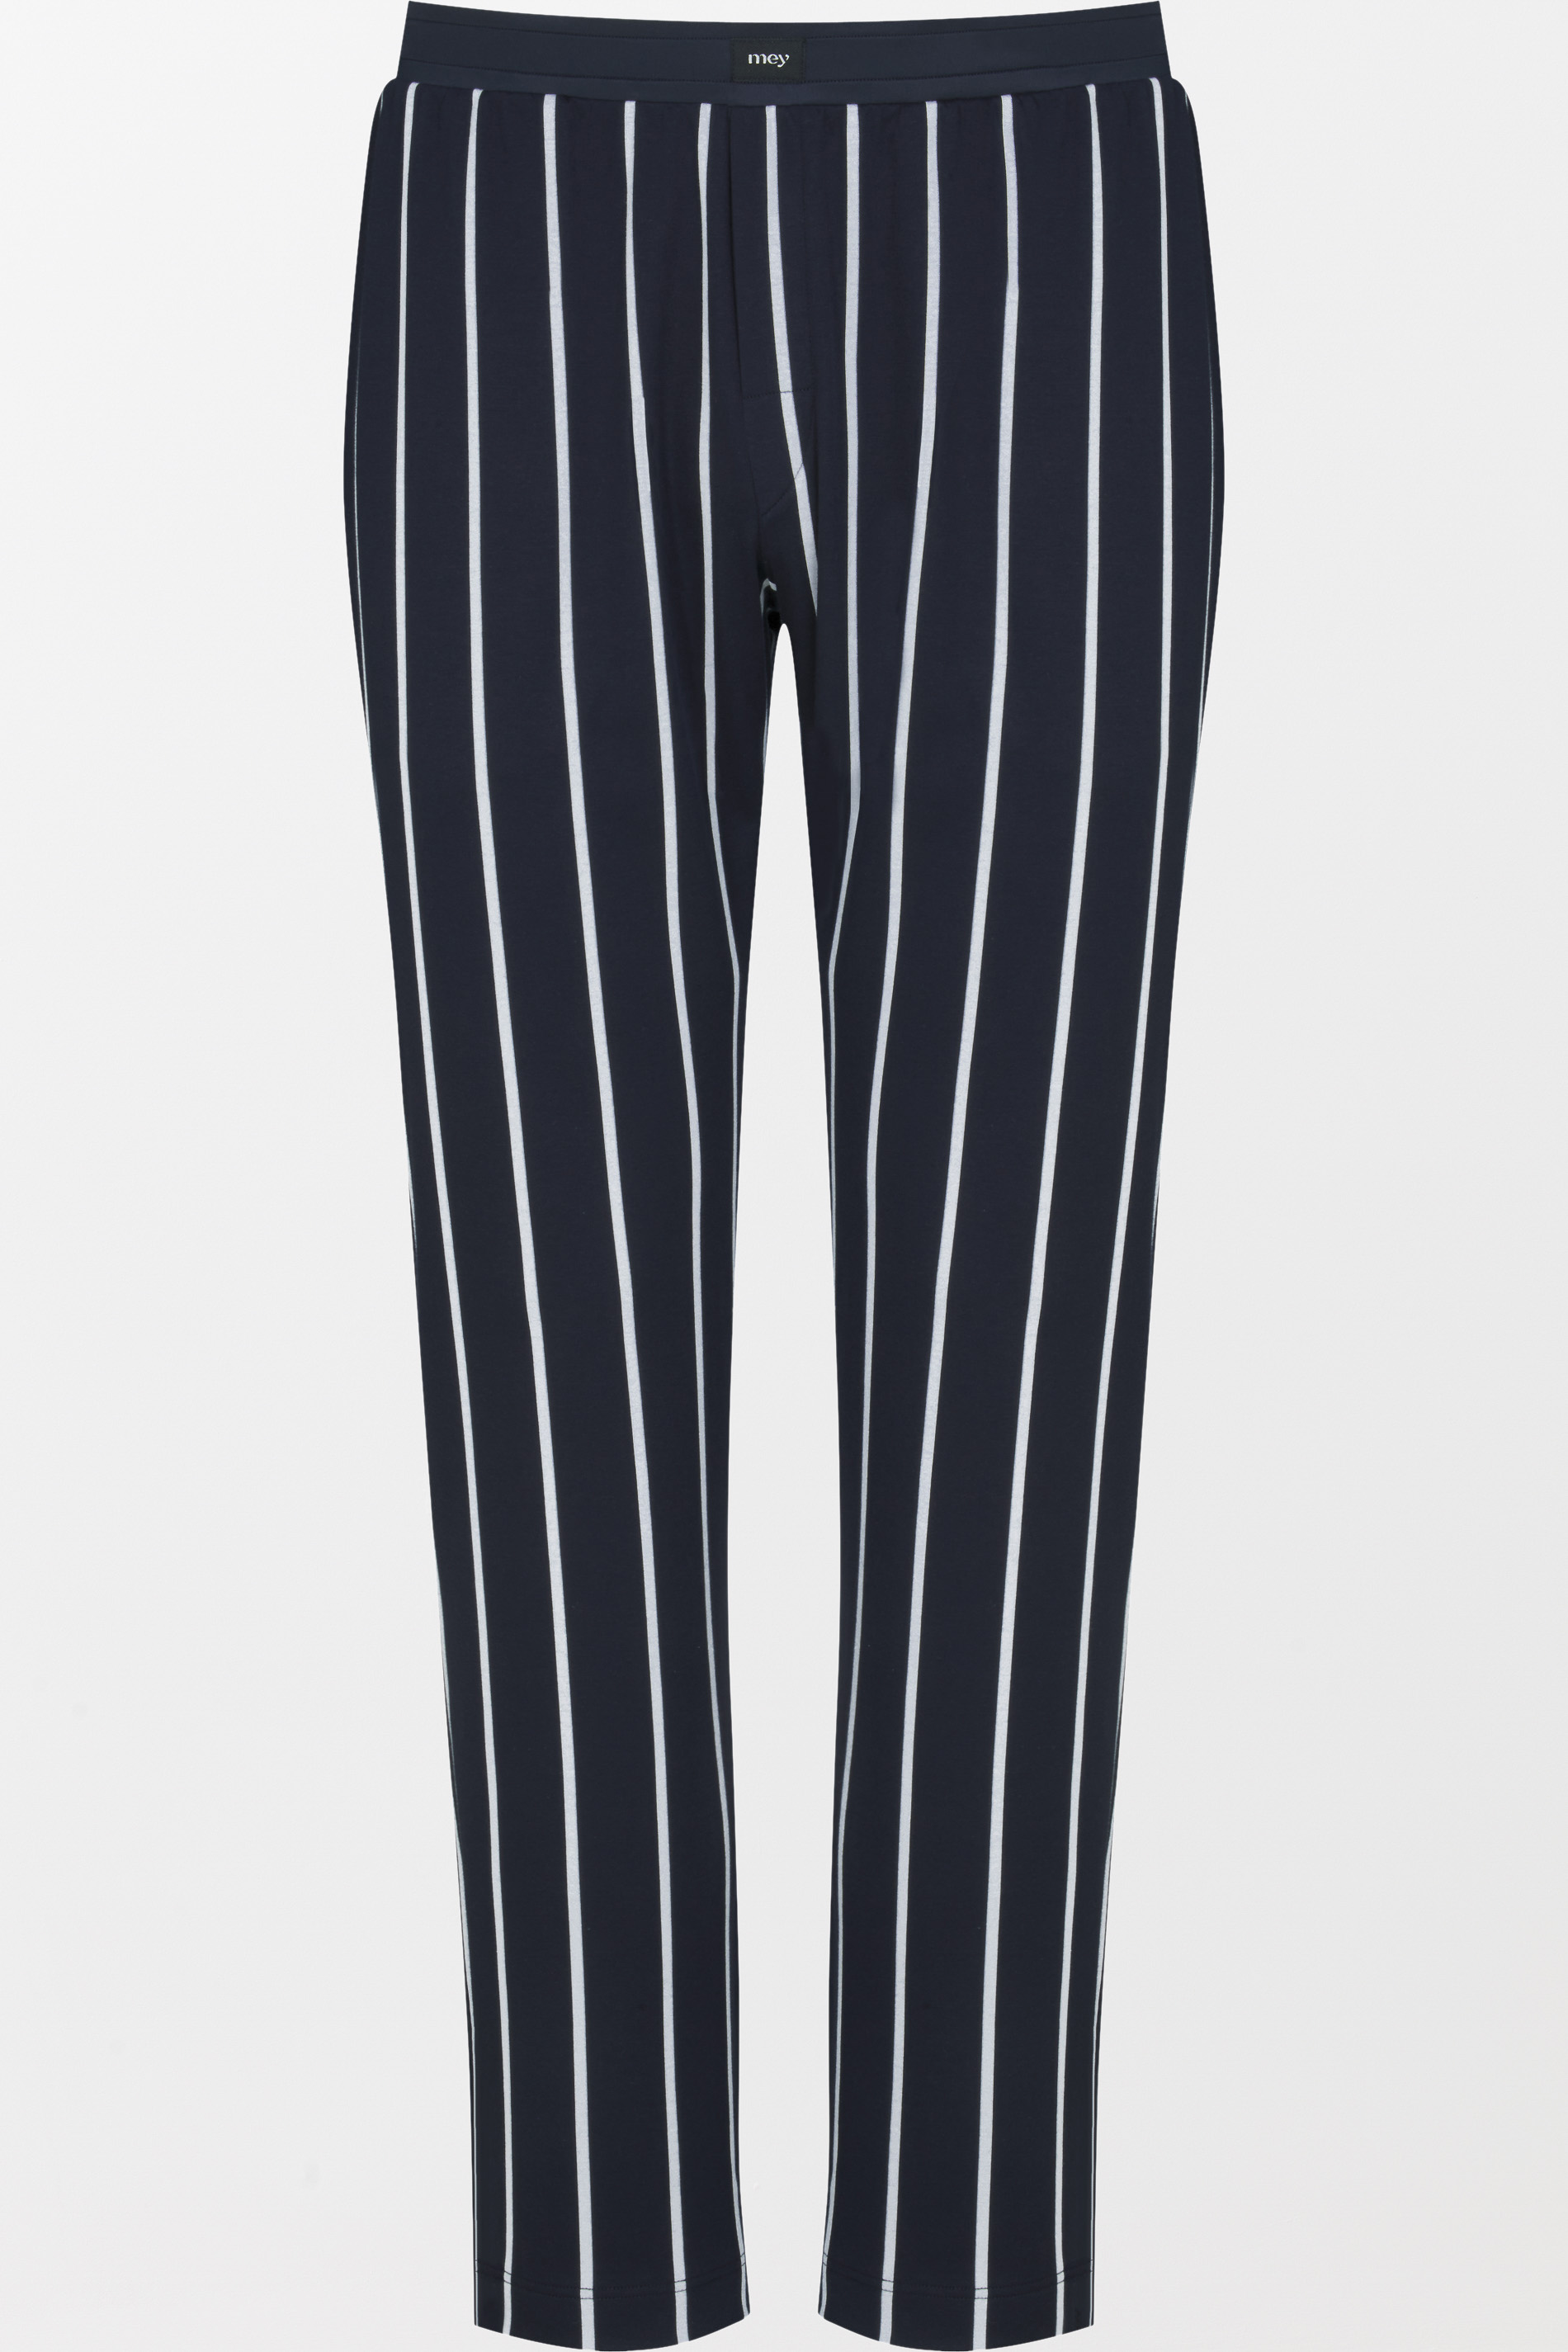 Long-pants Indigo Serie Valsted Uitknippen | mey®